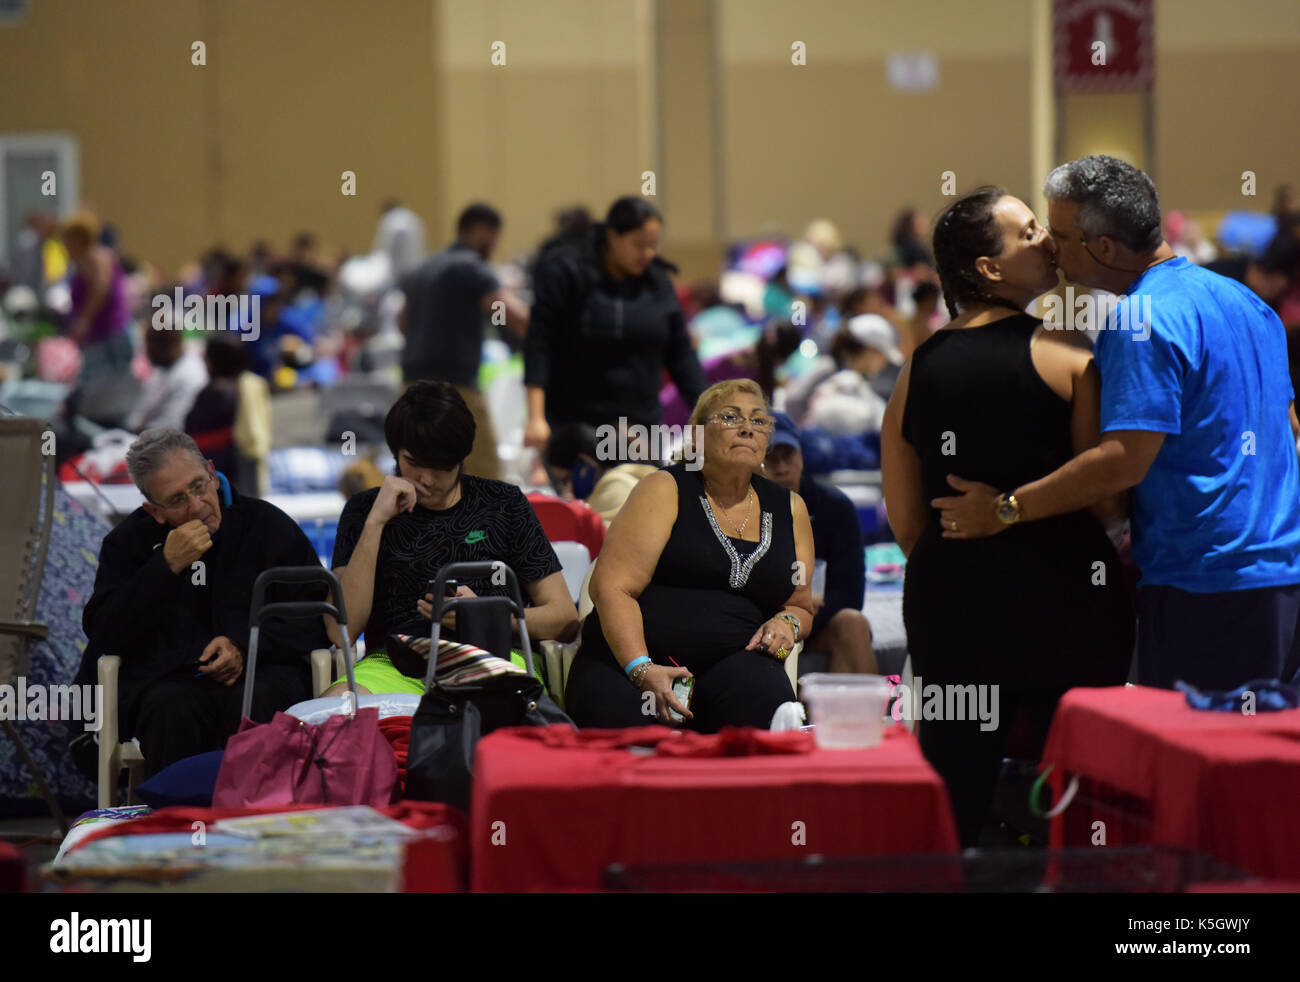 Miami, USA. 9th Sep, 2017. People are seen at a shelter at the Miami-Dade County Fair Expo Center in Miami, as hurricane 'Irma' is approaching, in Miami, Florida, the United States, Sept. 9, 2017. About 5.6 million people in Florida have been ordered to evacuate, while 54,000 Floridians have taken shelter in 320 shelters across Florida. Forecasters expect the hurricane to hit Florida early Sunday morning. Credit: Yin Bogu/Xinhua/Alamy Live News Stock Photo